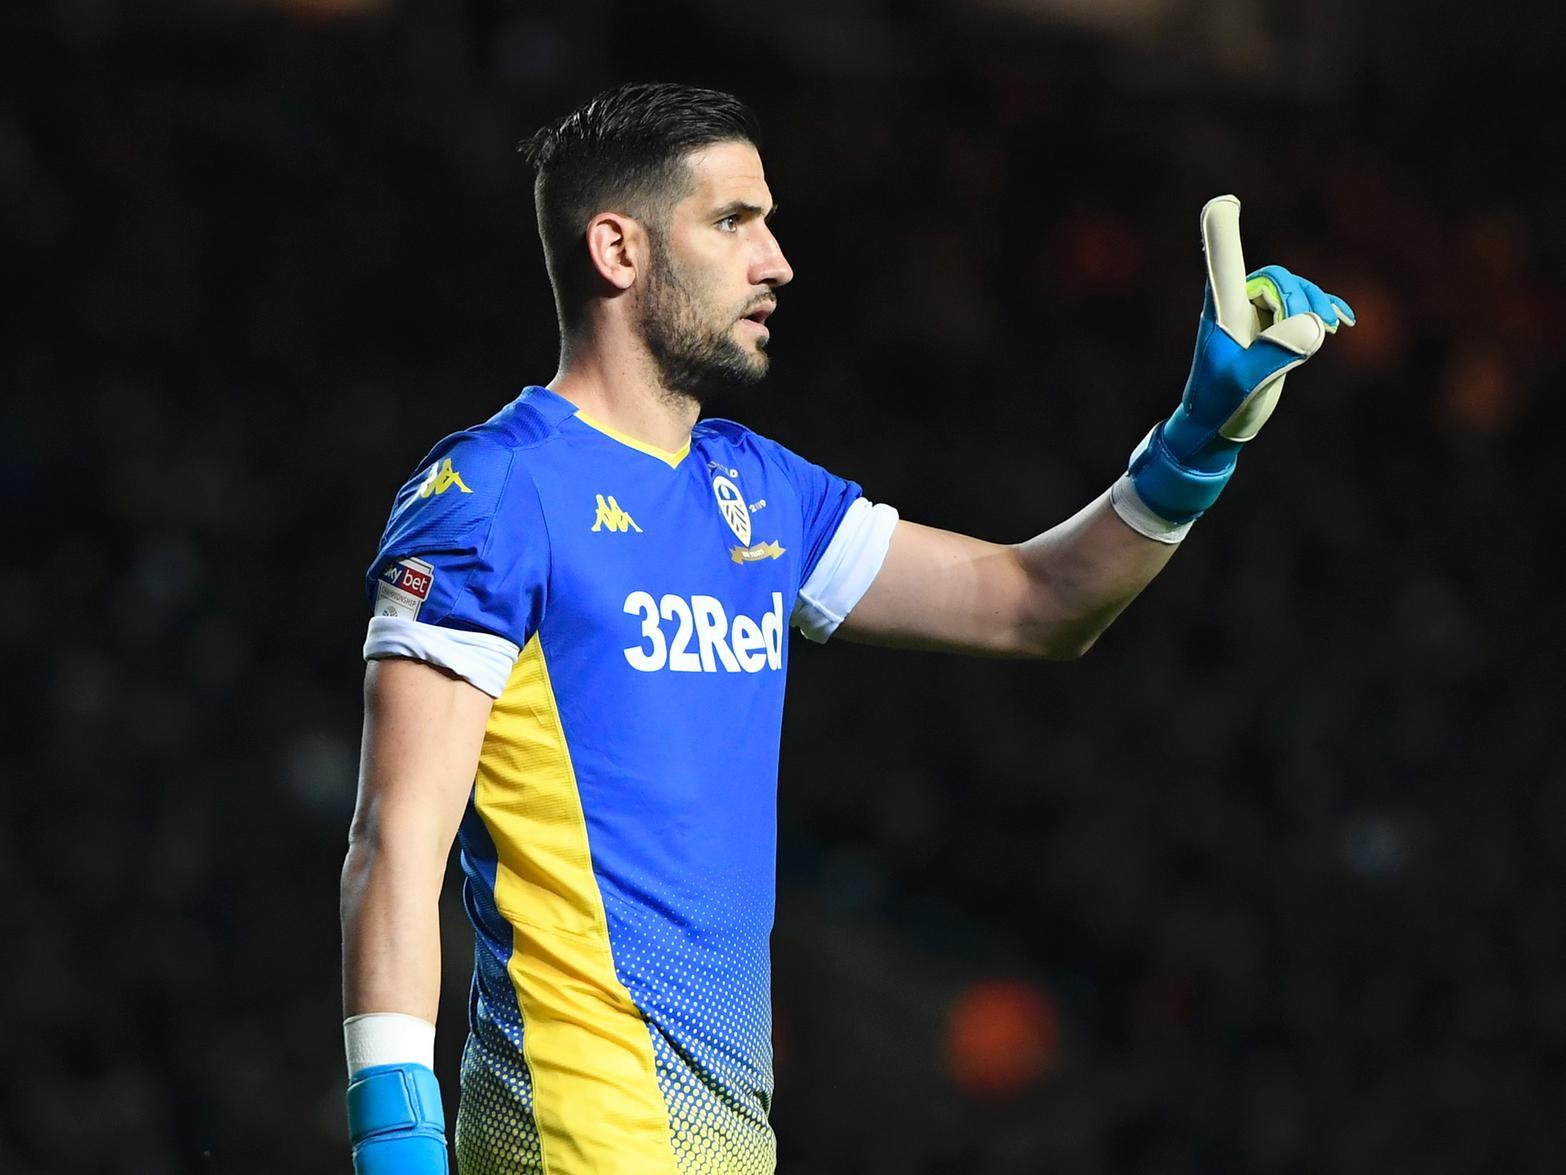 The former Real Madrid man is playing an integral role in the side's push for promotion, and has more clean sheets than any other 'keeper in the division this season